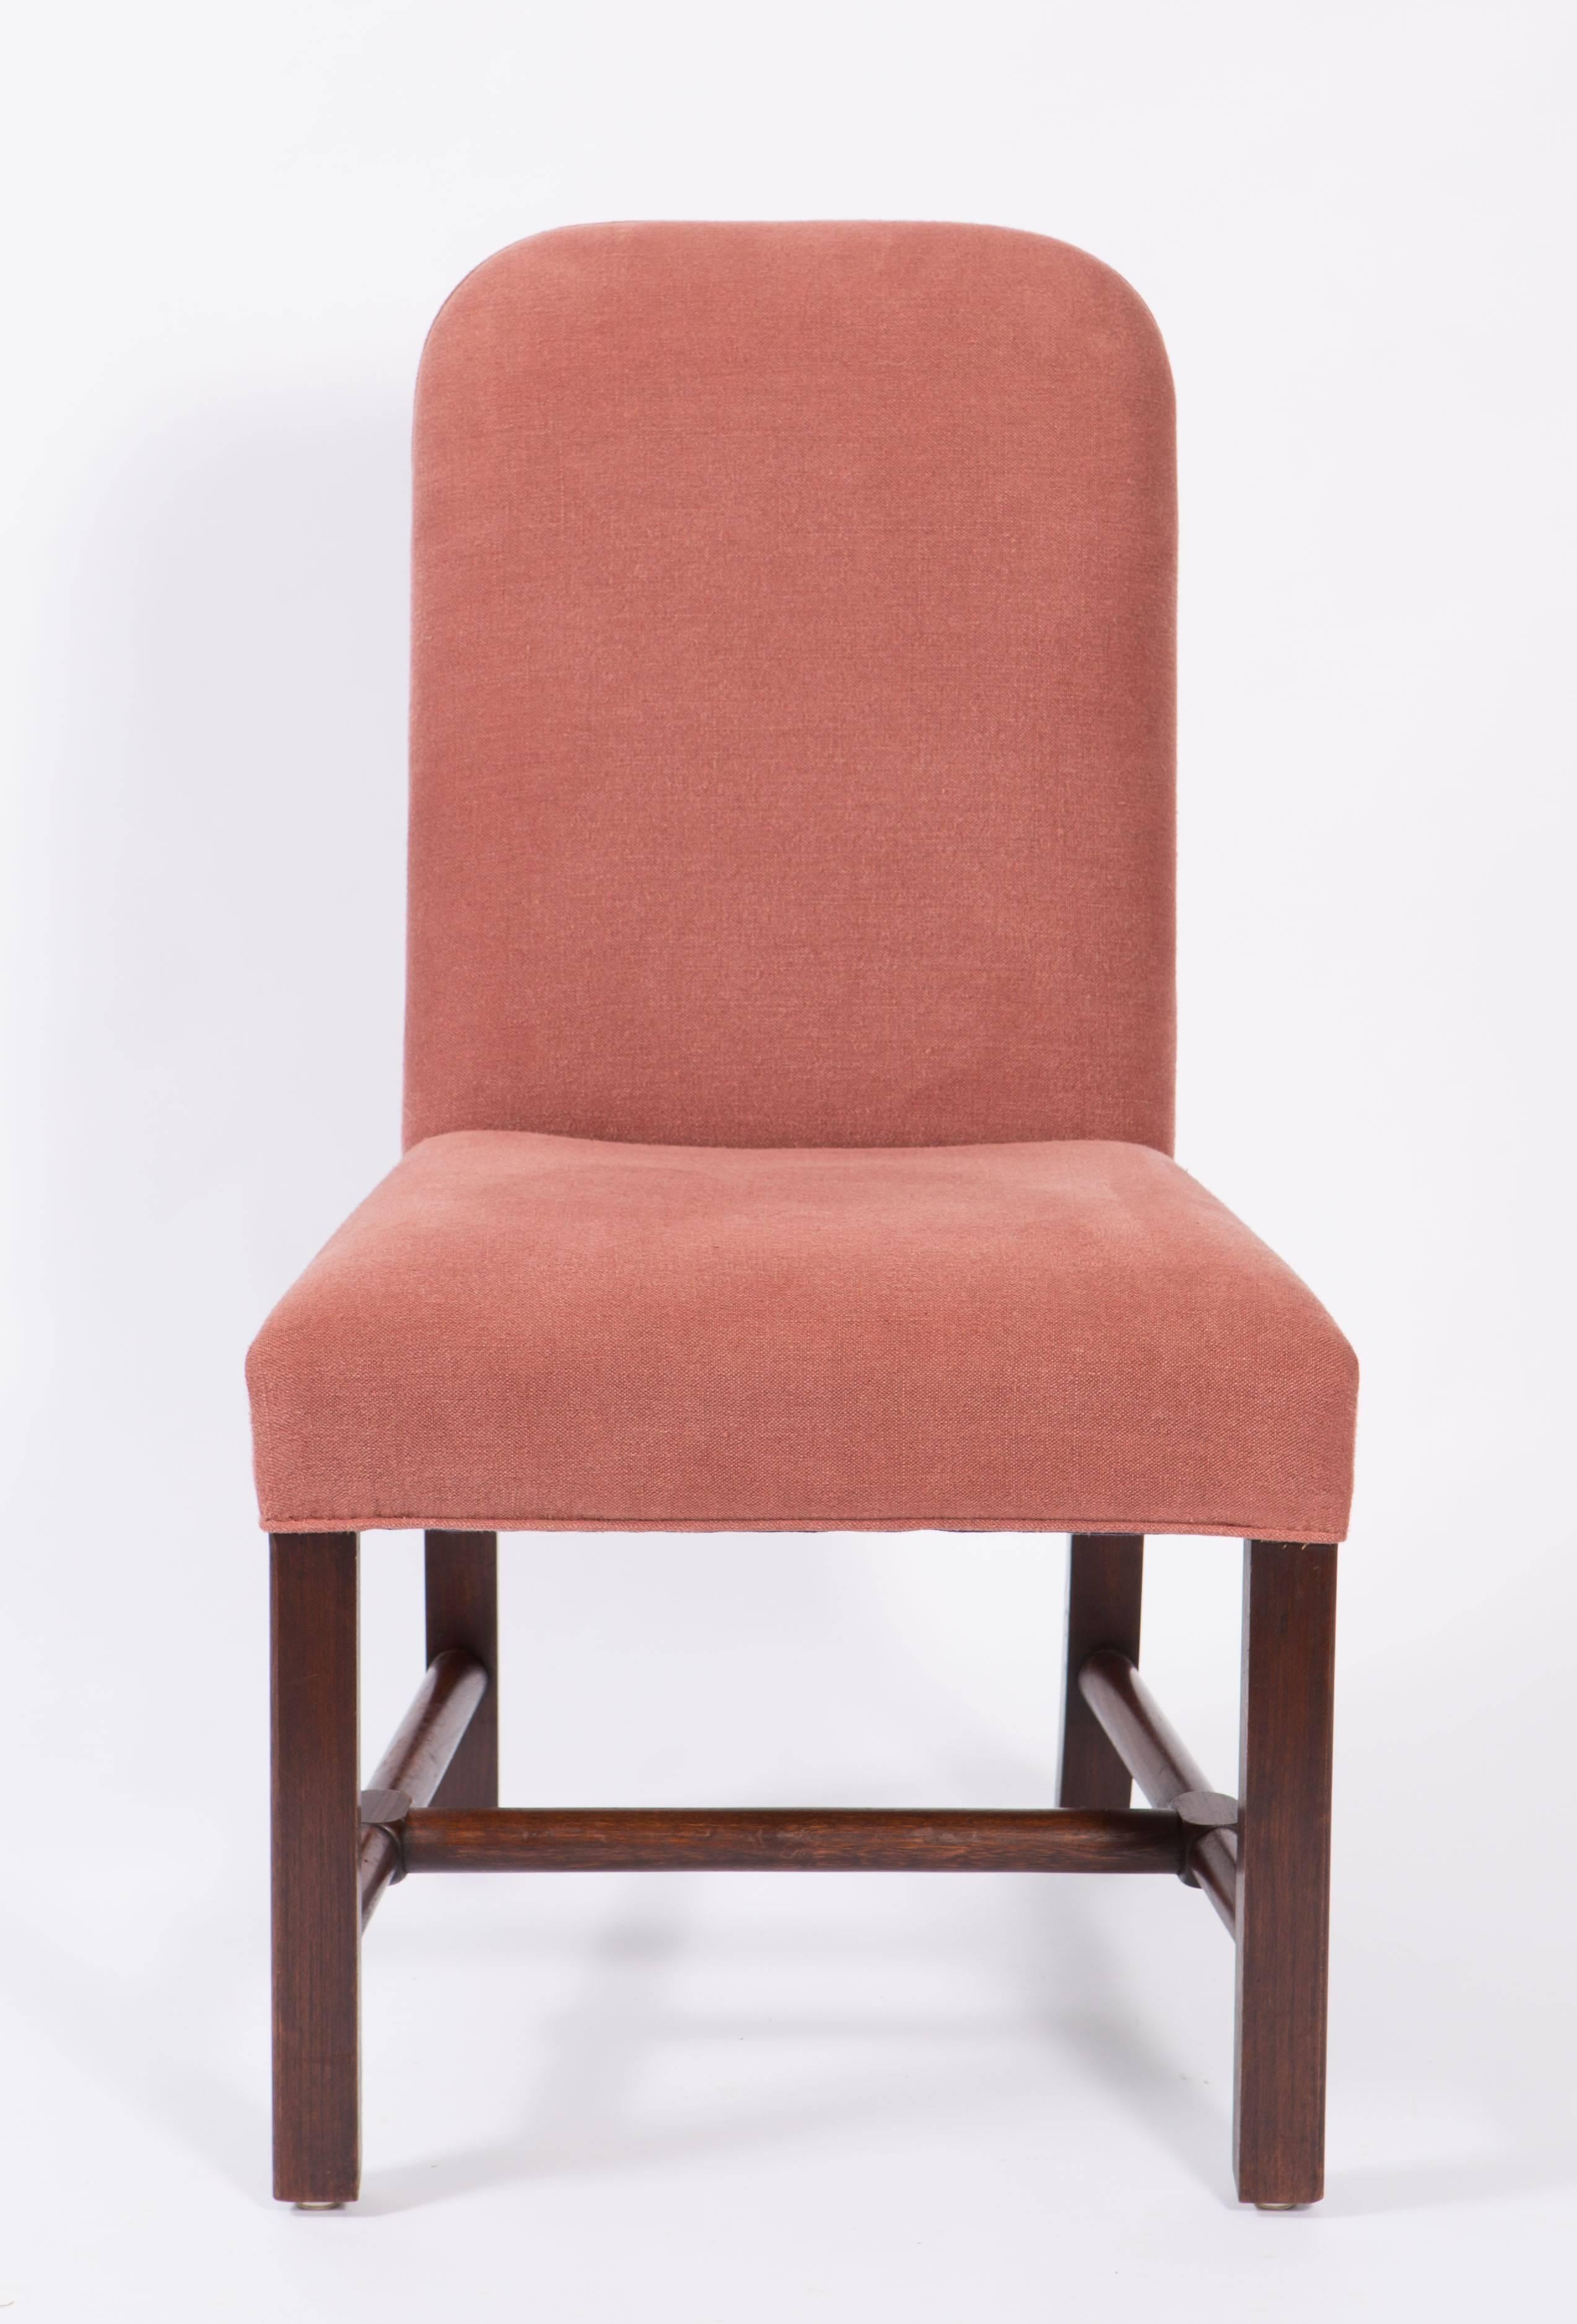 Upholstered pair of side chairs purchased from Axel Vervoordt covered in dusty mauve linen with dark stained legs. They are in excellent condition. 